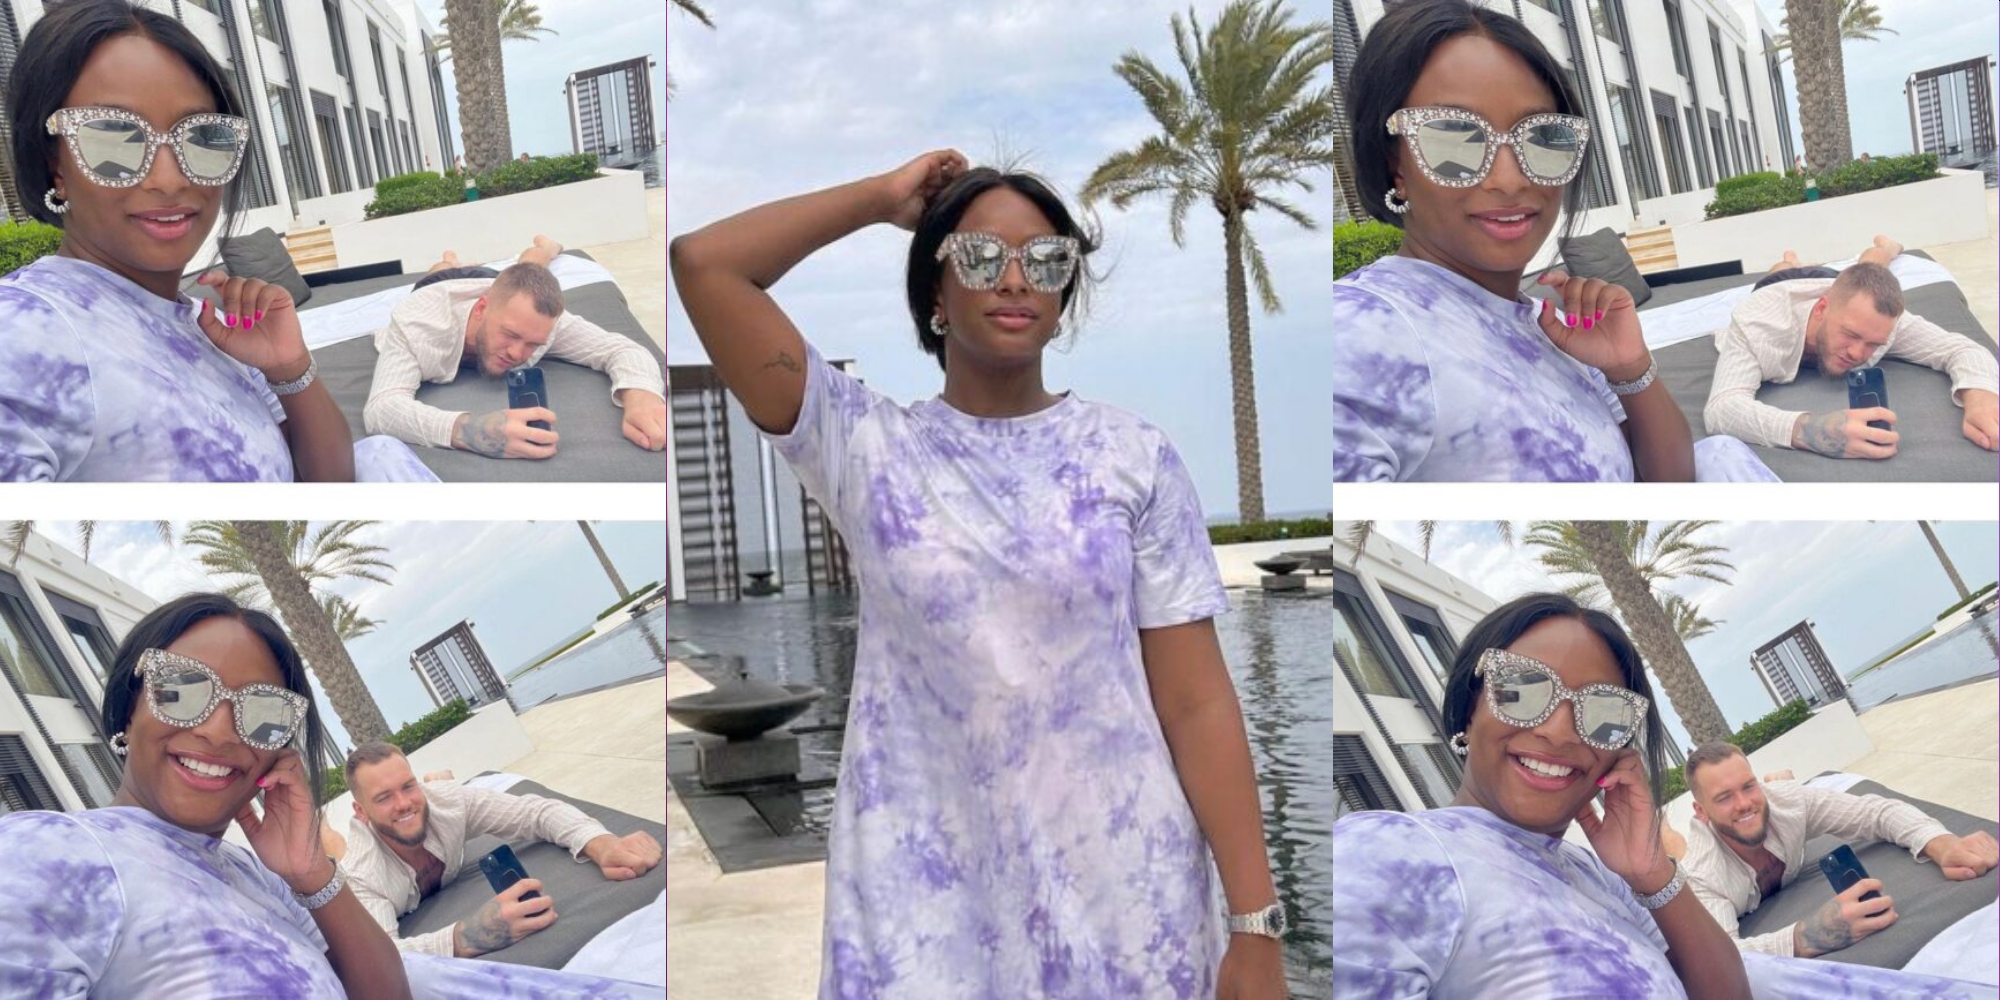 “My life has turned into a constant vacation” – DJ Cuppy goes on vacations with fiancé, Ryan, in Oman